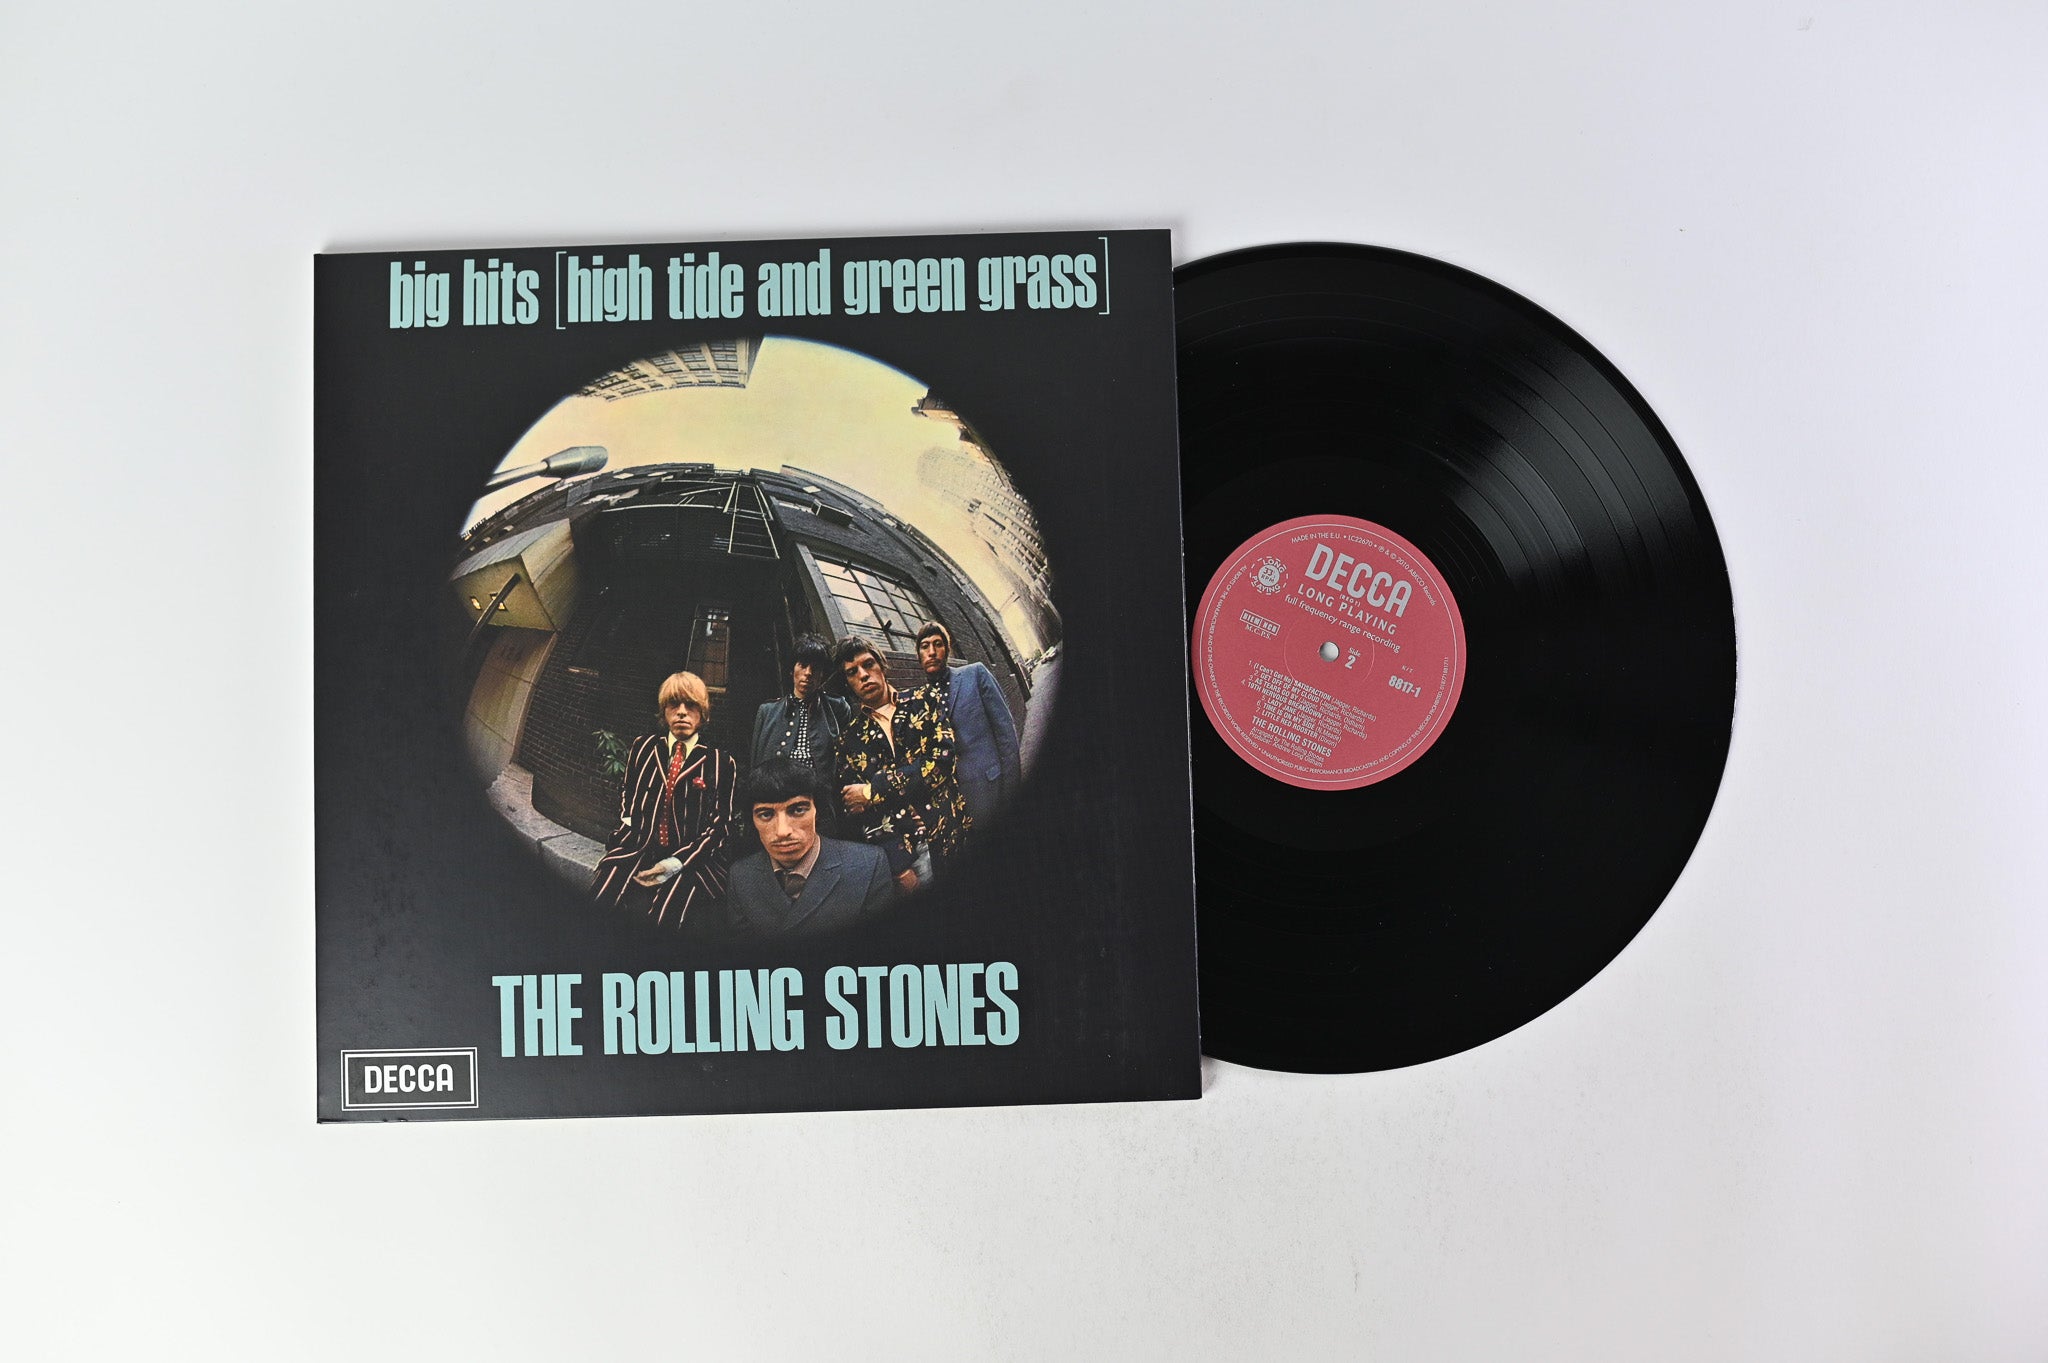 The Rolling Stones - Big Hits (High Tide And Green Grass) on ABKCO - Mono